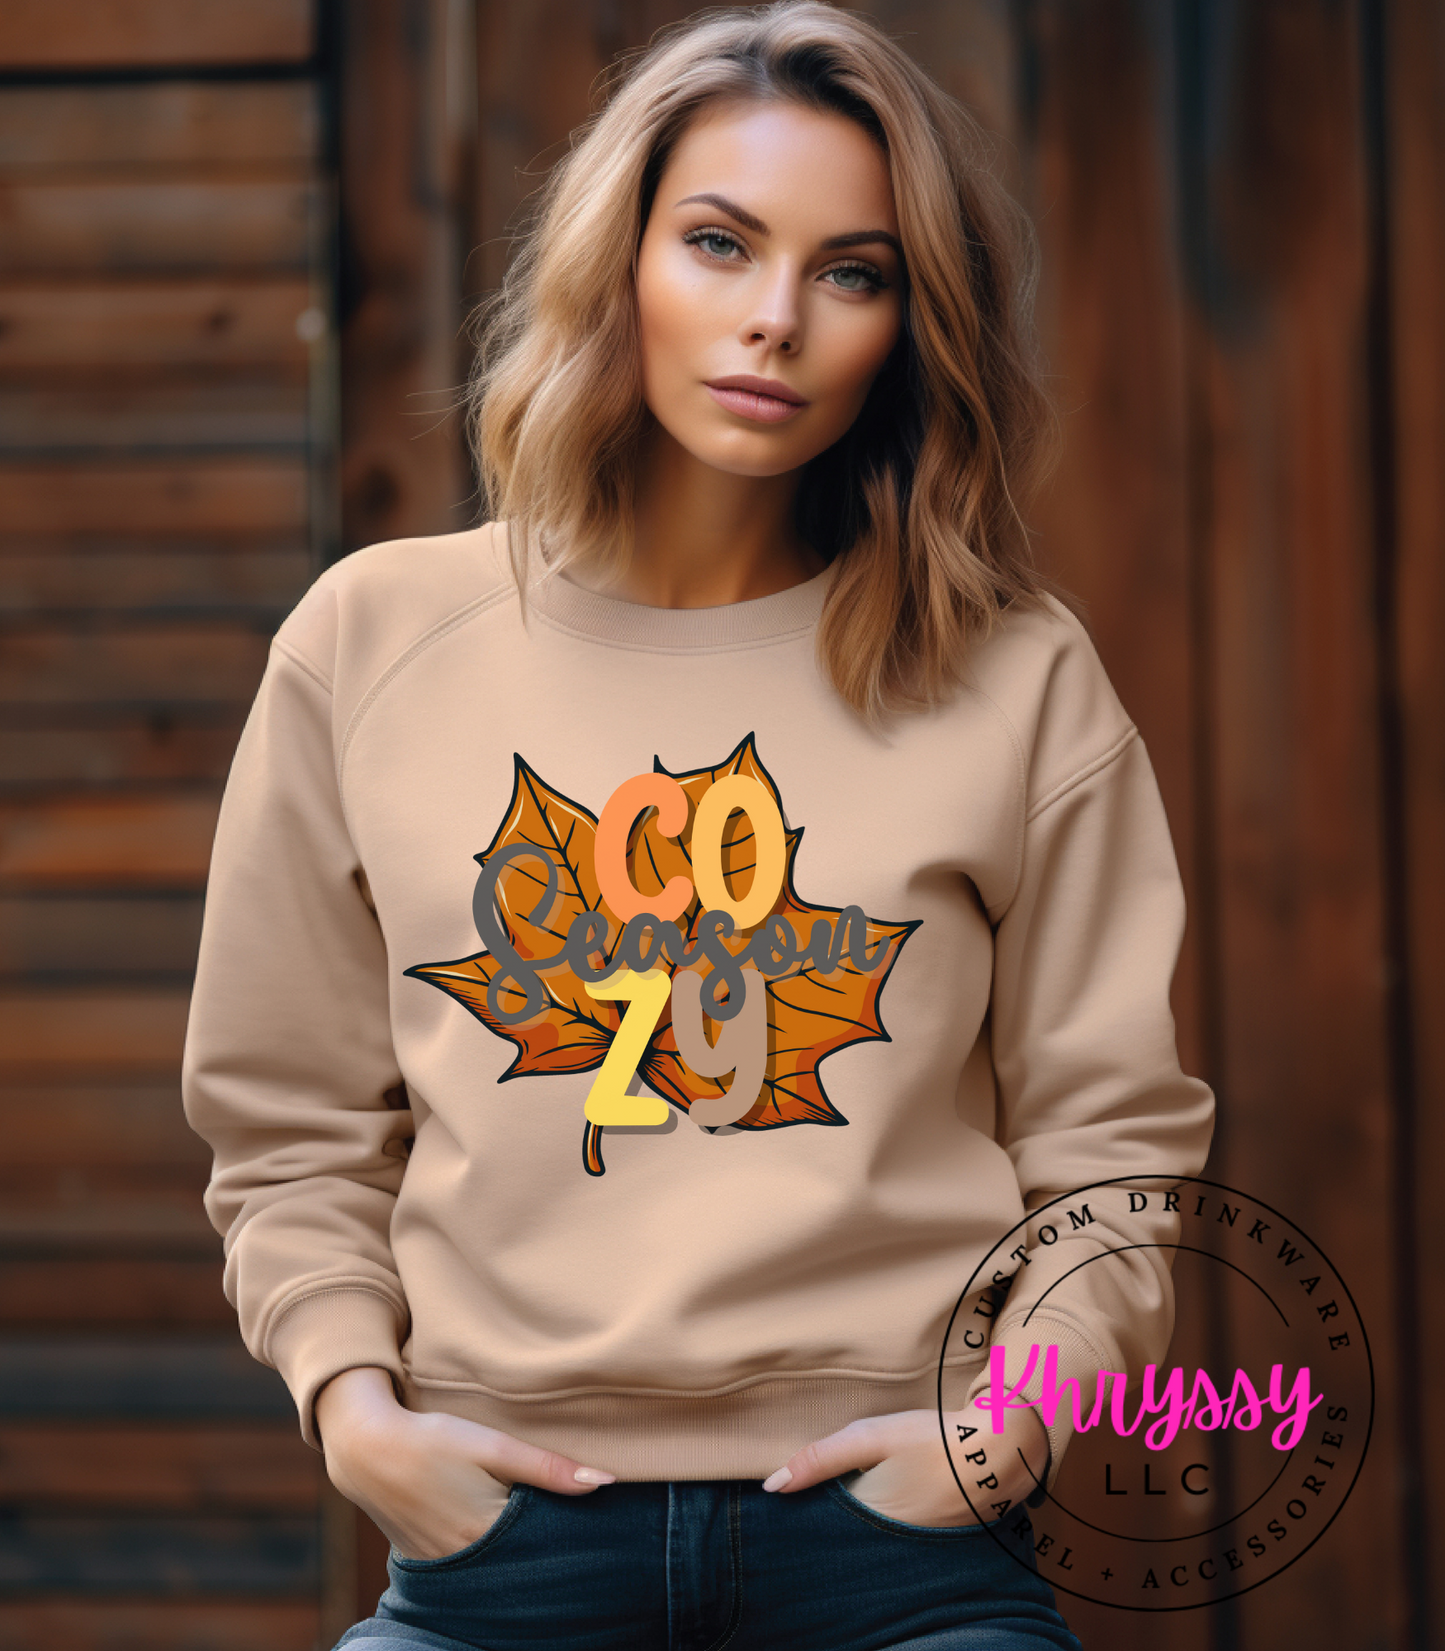 Autumn Bliss: Cozy Season Shirt - Embrace the Warmth of Fall!